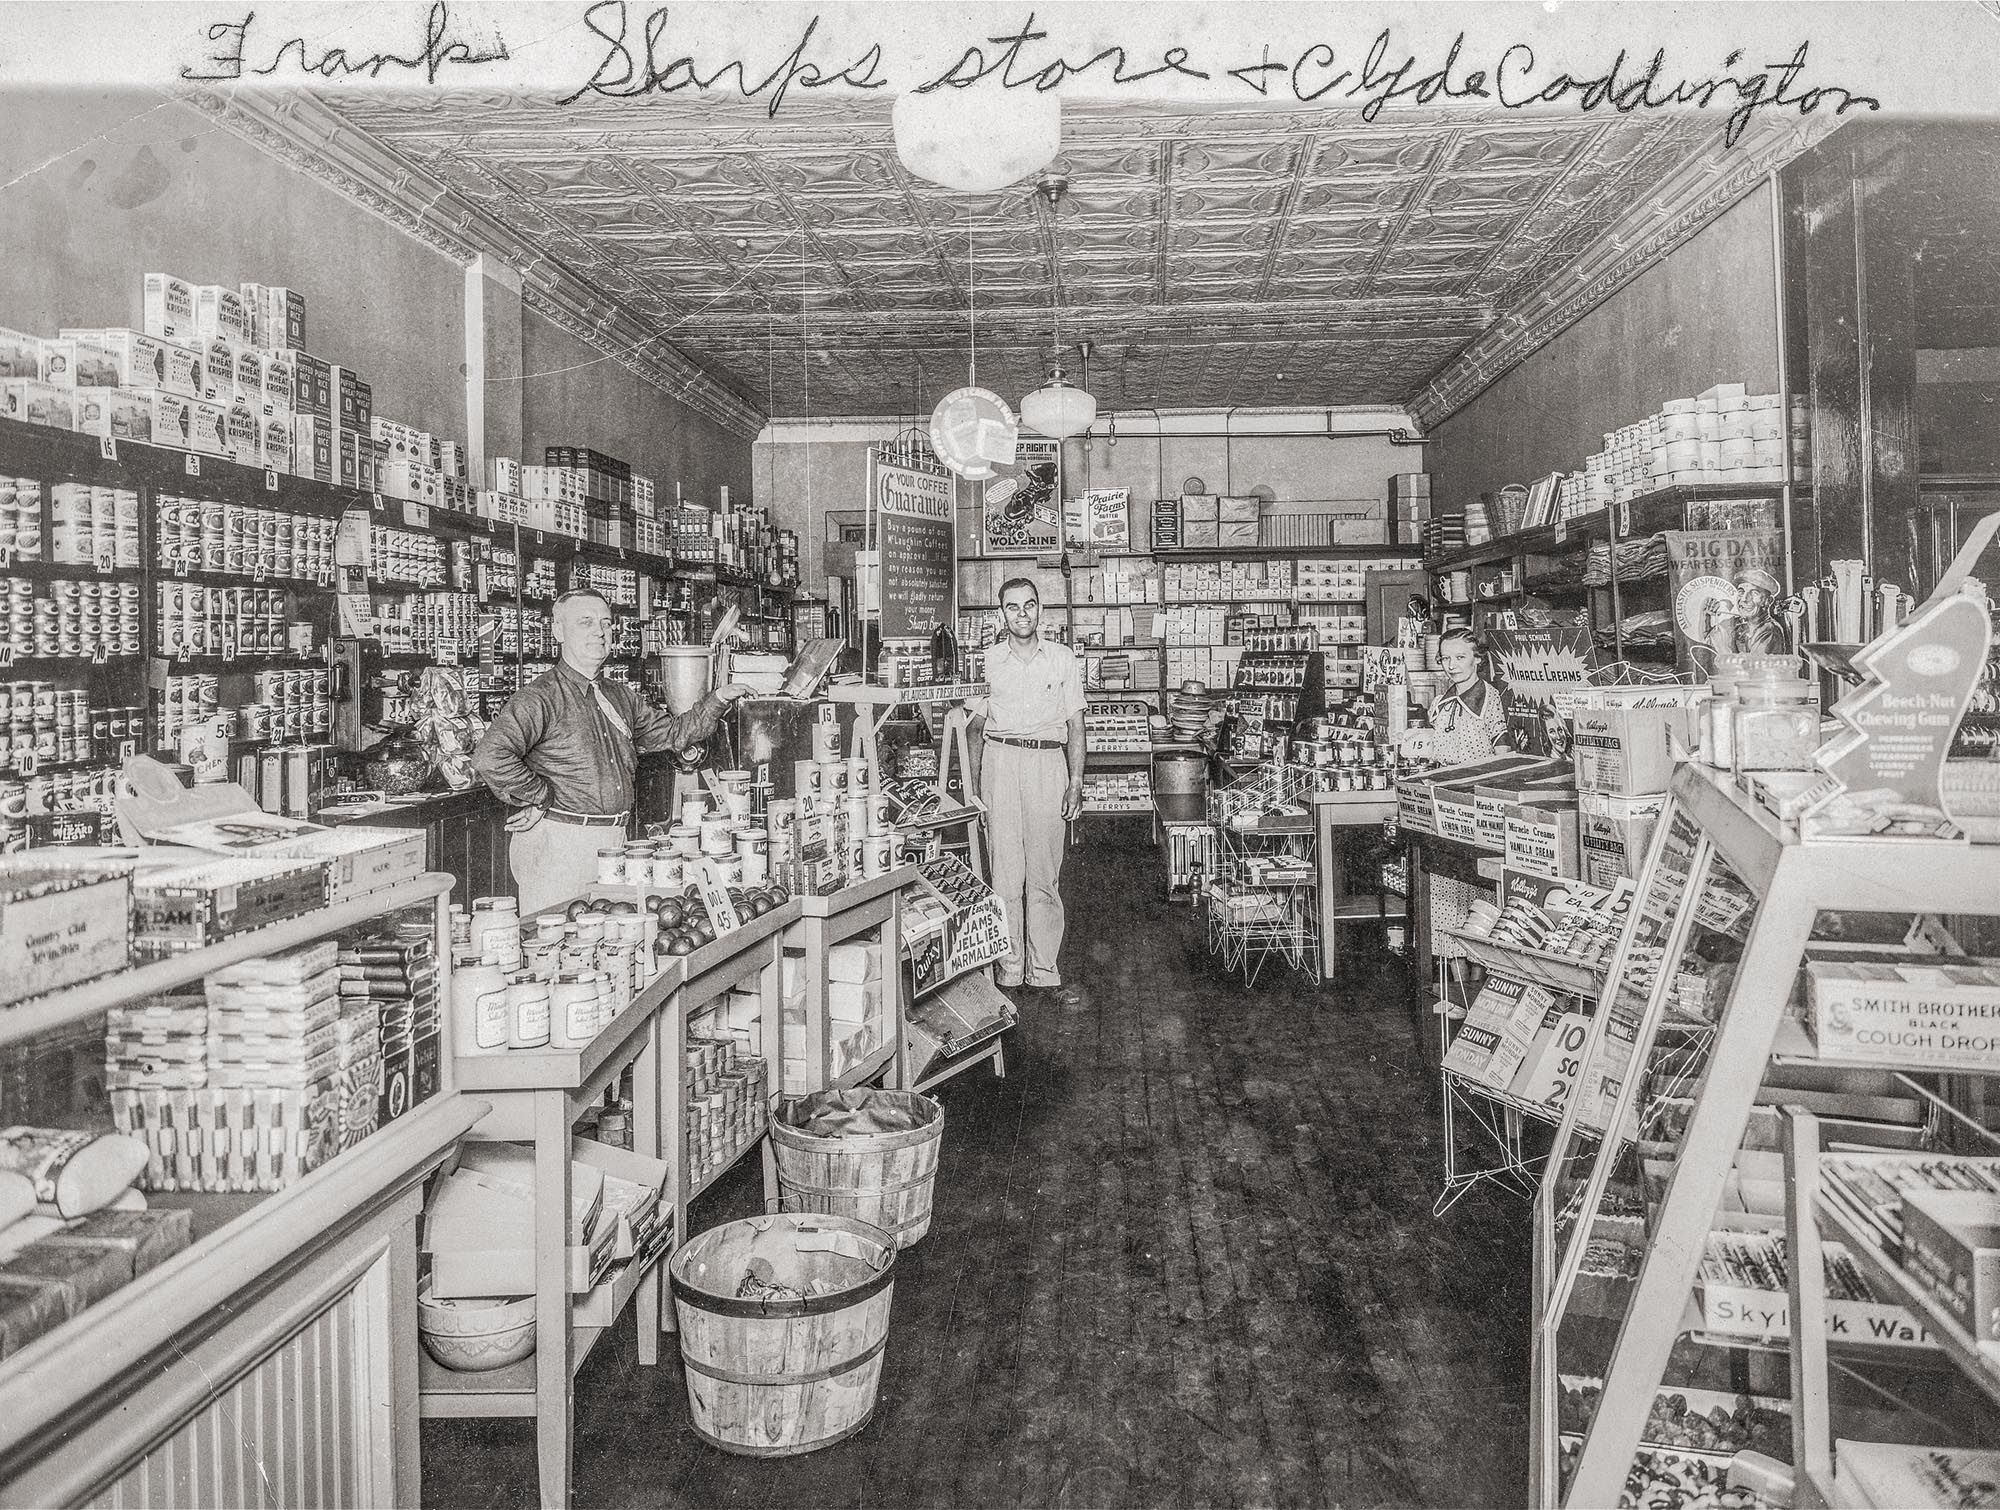 Frank Sharp's store in Tremont, Illinois.  June 1936. Frank is seen with Clyde Coddington and Minnie Broner. The store operated from 1928 to 1965 and was located across the street from Beechams Market, where the present day First National Bank of Tremont is located. 

Property of, and used by permission of, the Tremont Museum and Historical Society, corner of Sampson and Madison Streets, Tremont, IL.